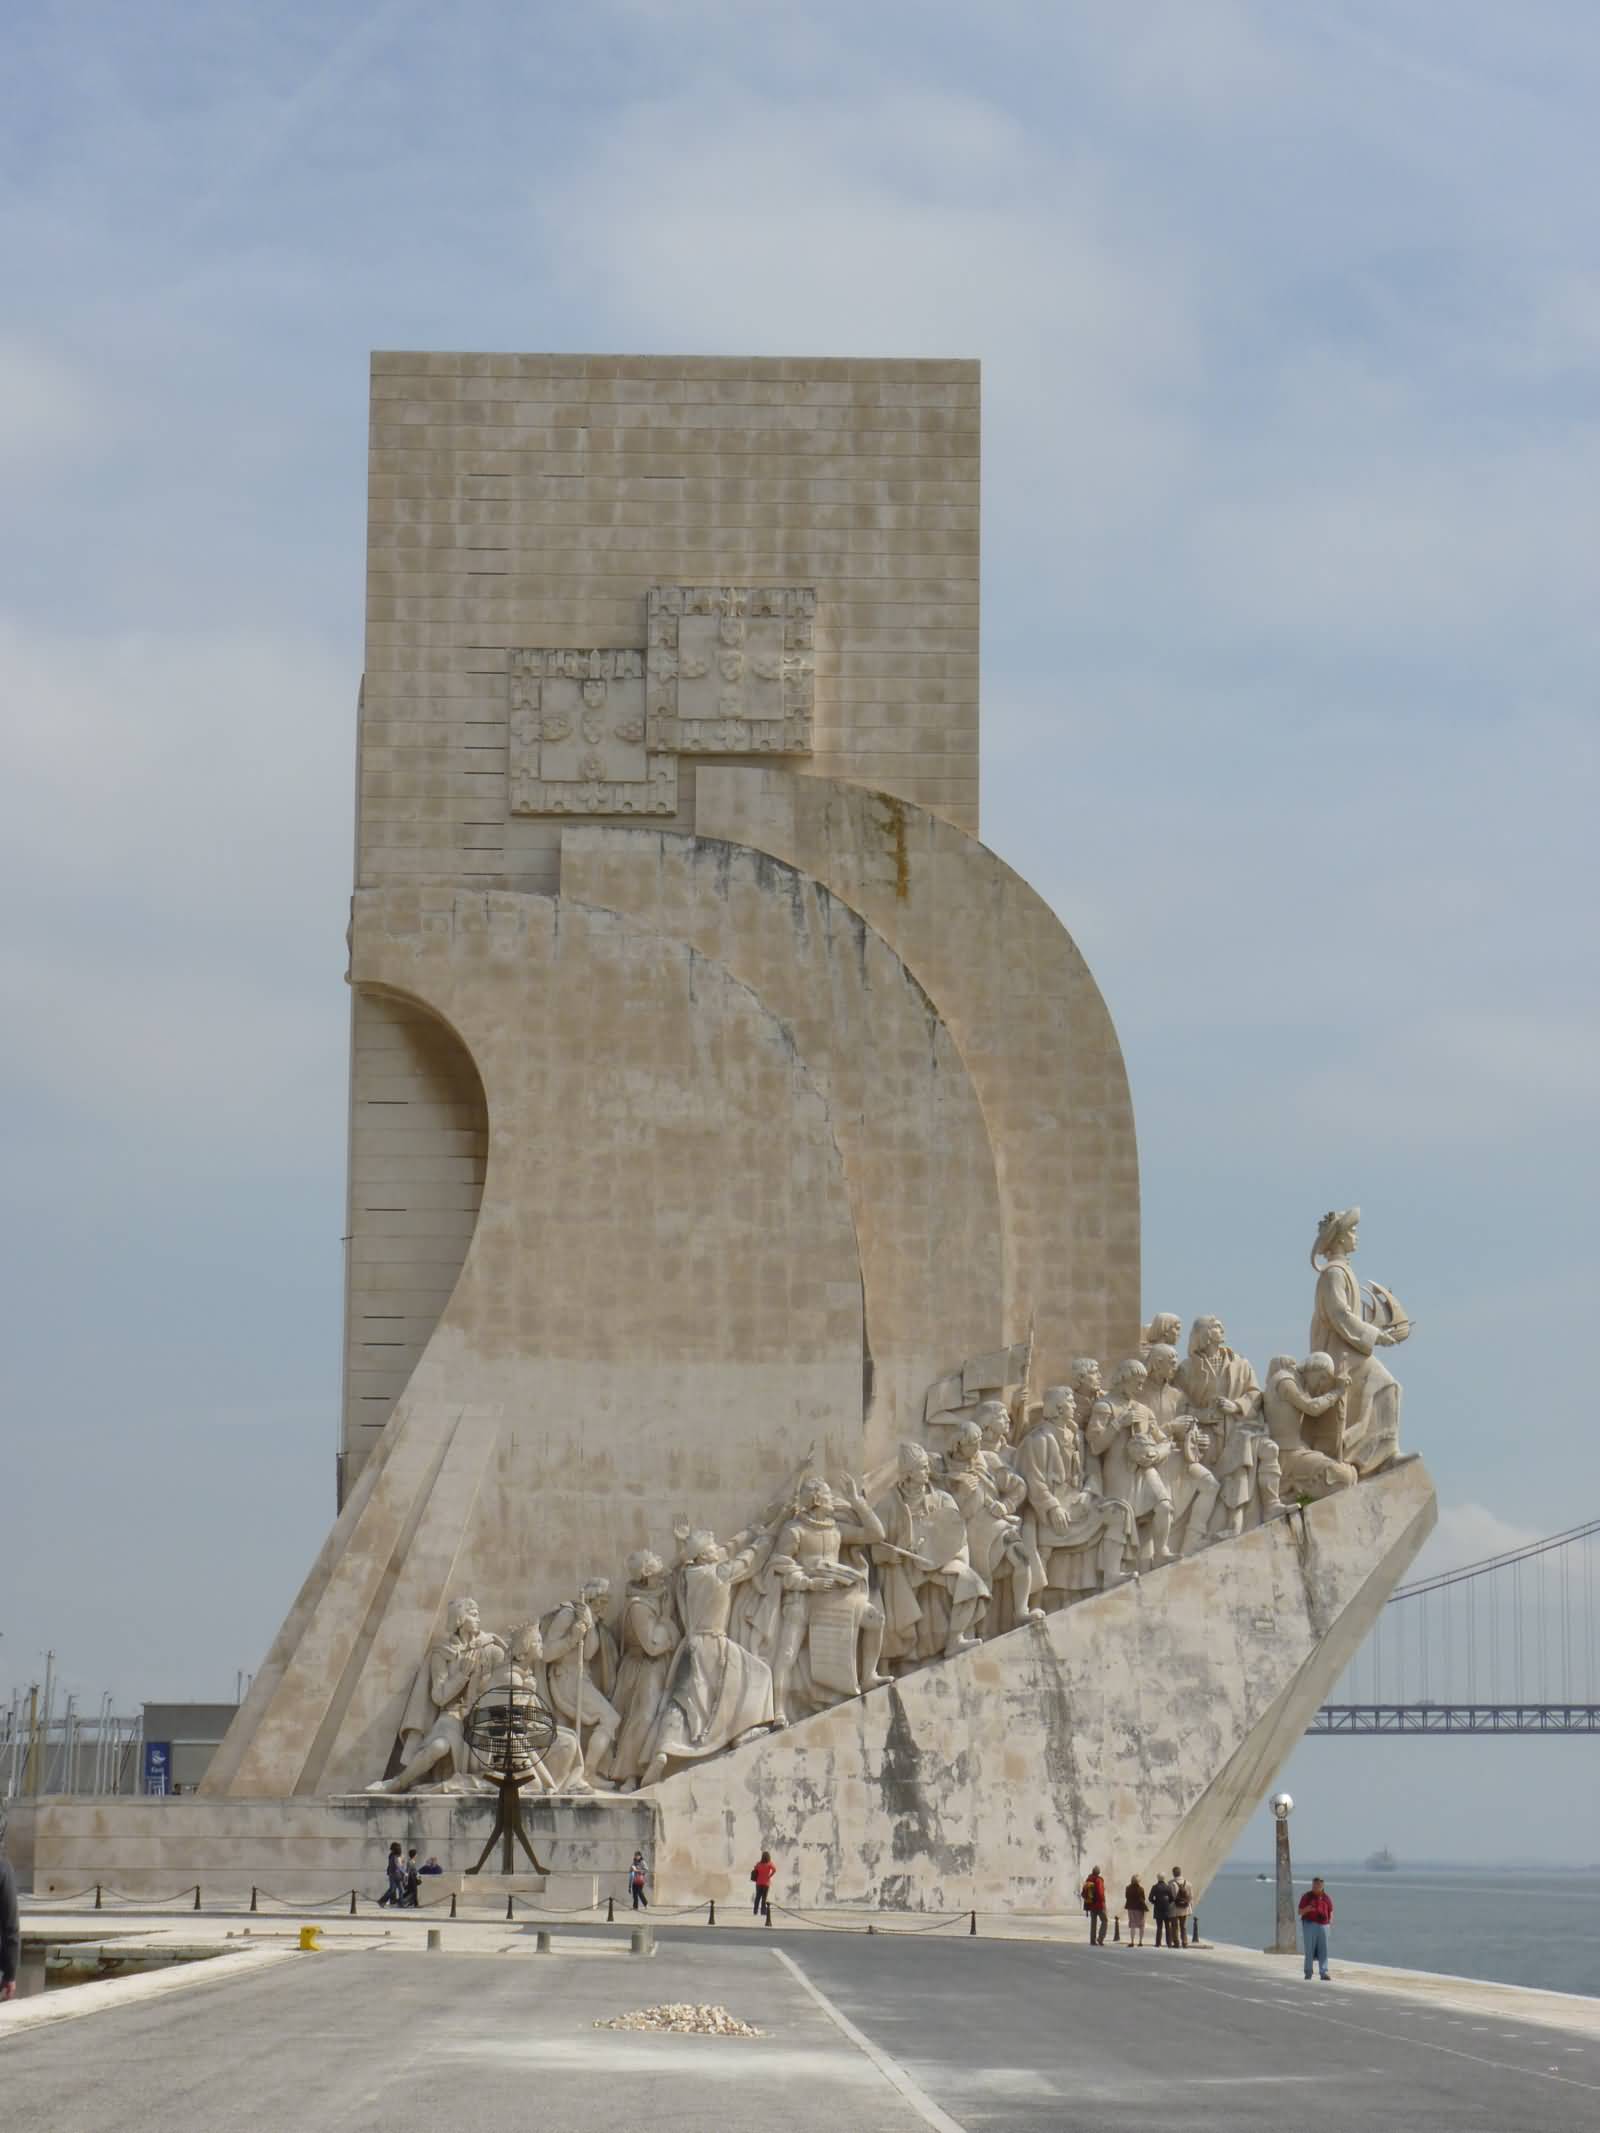 55 Incredible Pictures Of Padrao dos Descobrimentos In Portugal